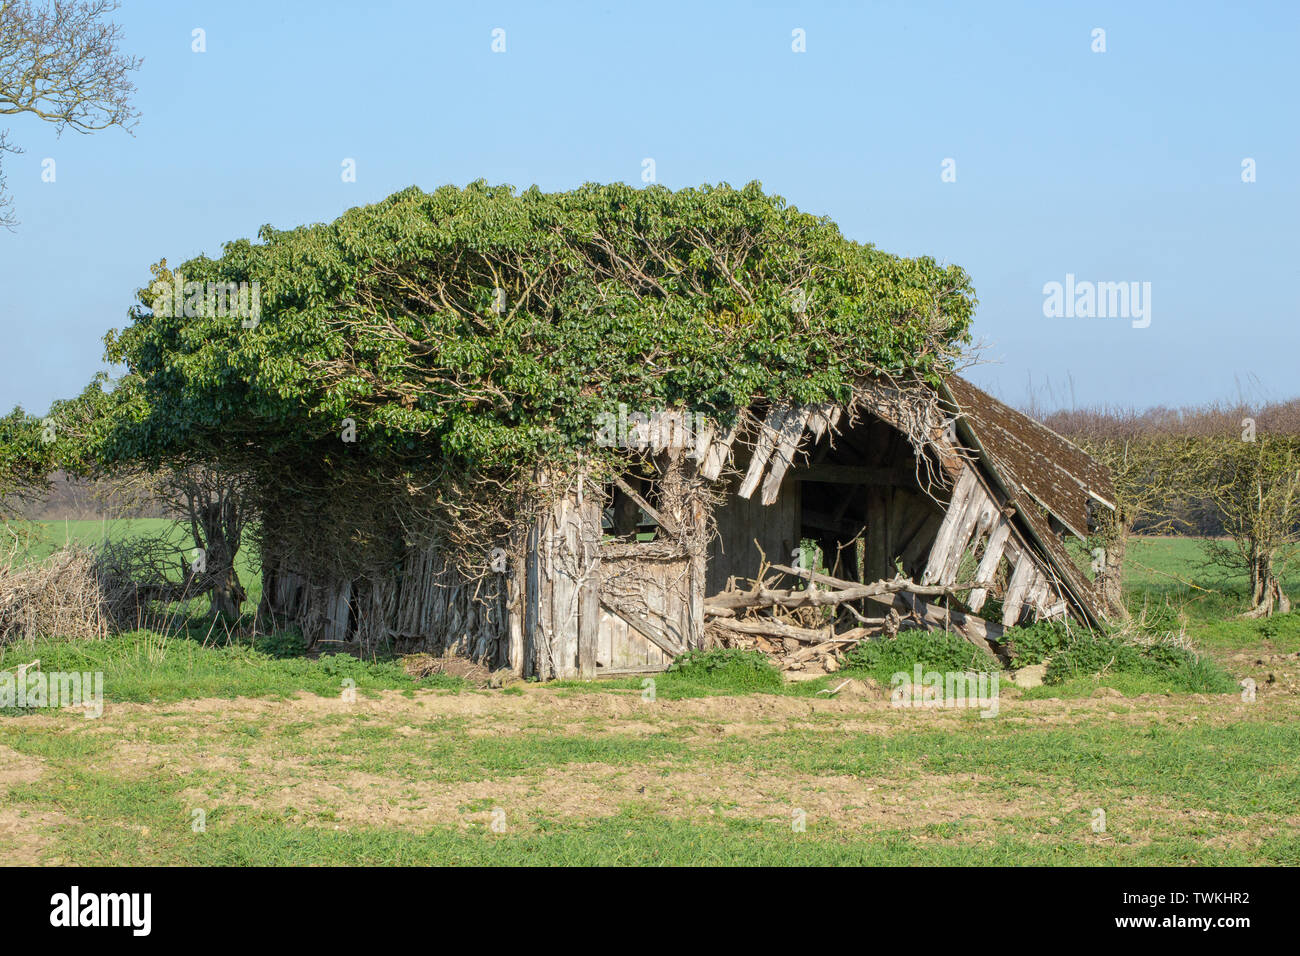 Asbestos roofed, former cattle field shed and shelter. Redundant. Wild Red Deer (Cervus elaphus), pruned Ivy (Hedera helix), still supporting left side wall from collapsing. Otherwise timber support structure about to fall. Rural Norfolk. UK Stock Photo